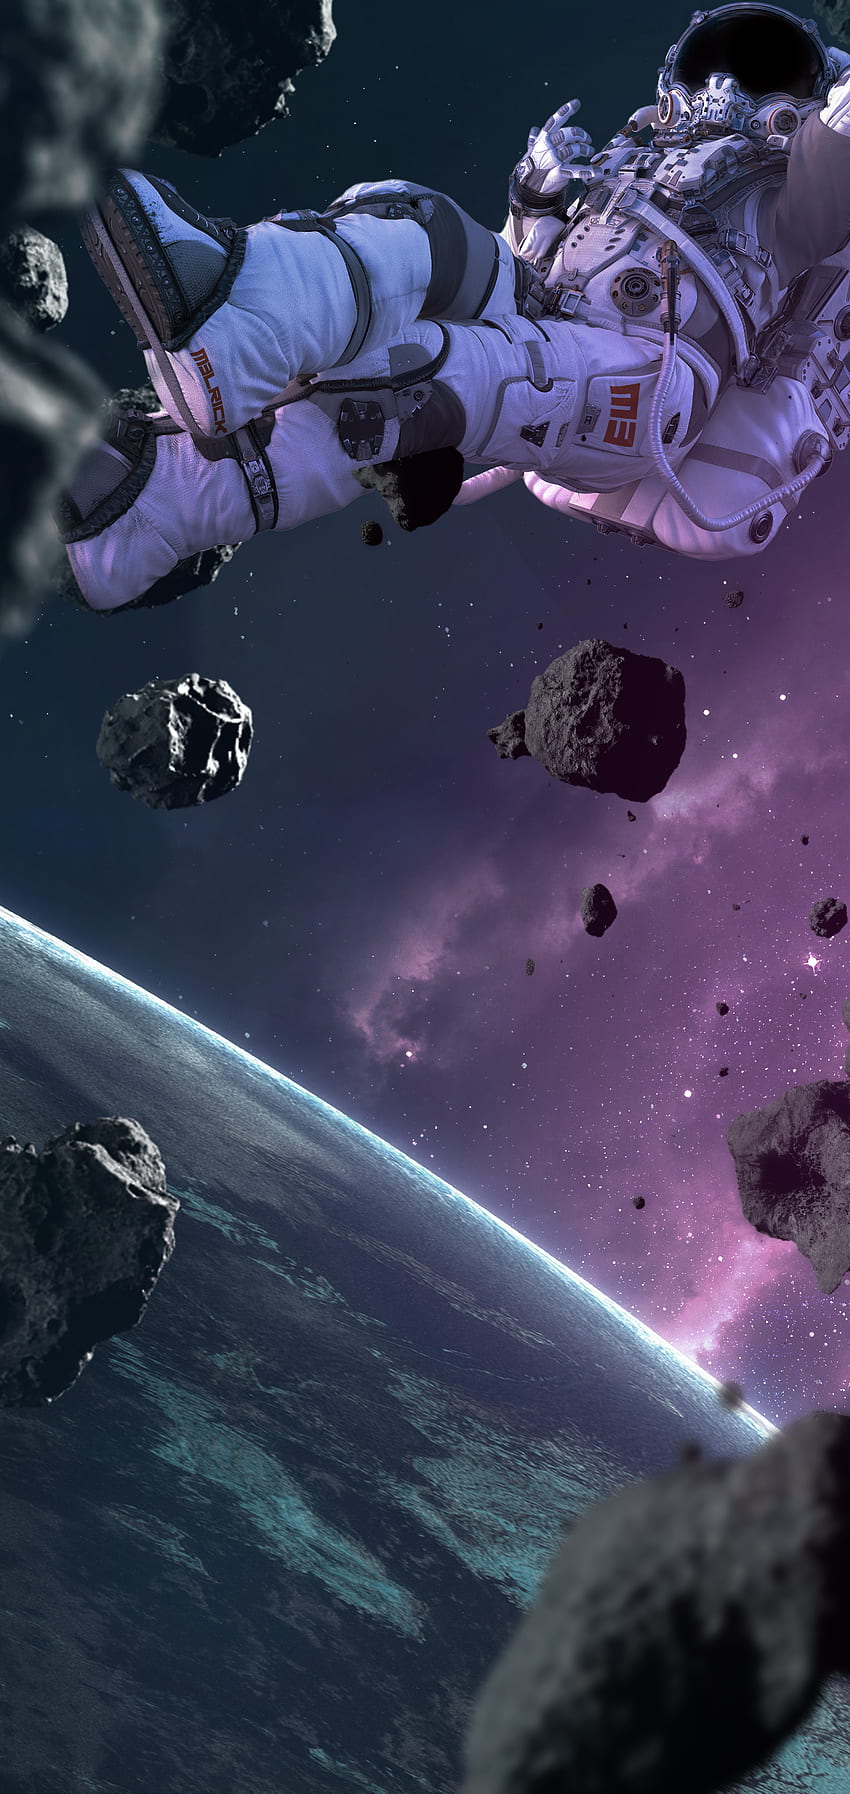 Floating In Space Galaxy S10 Hole Punch, Astronaut Floating in Space HD-Handy-Hintergrundbild